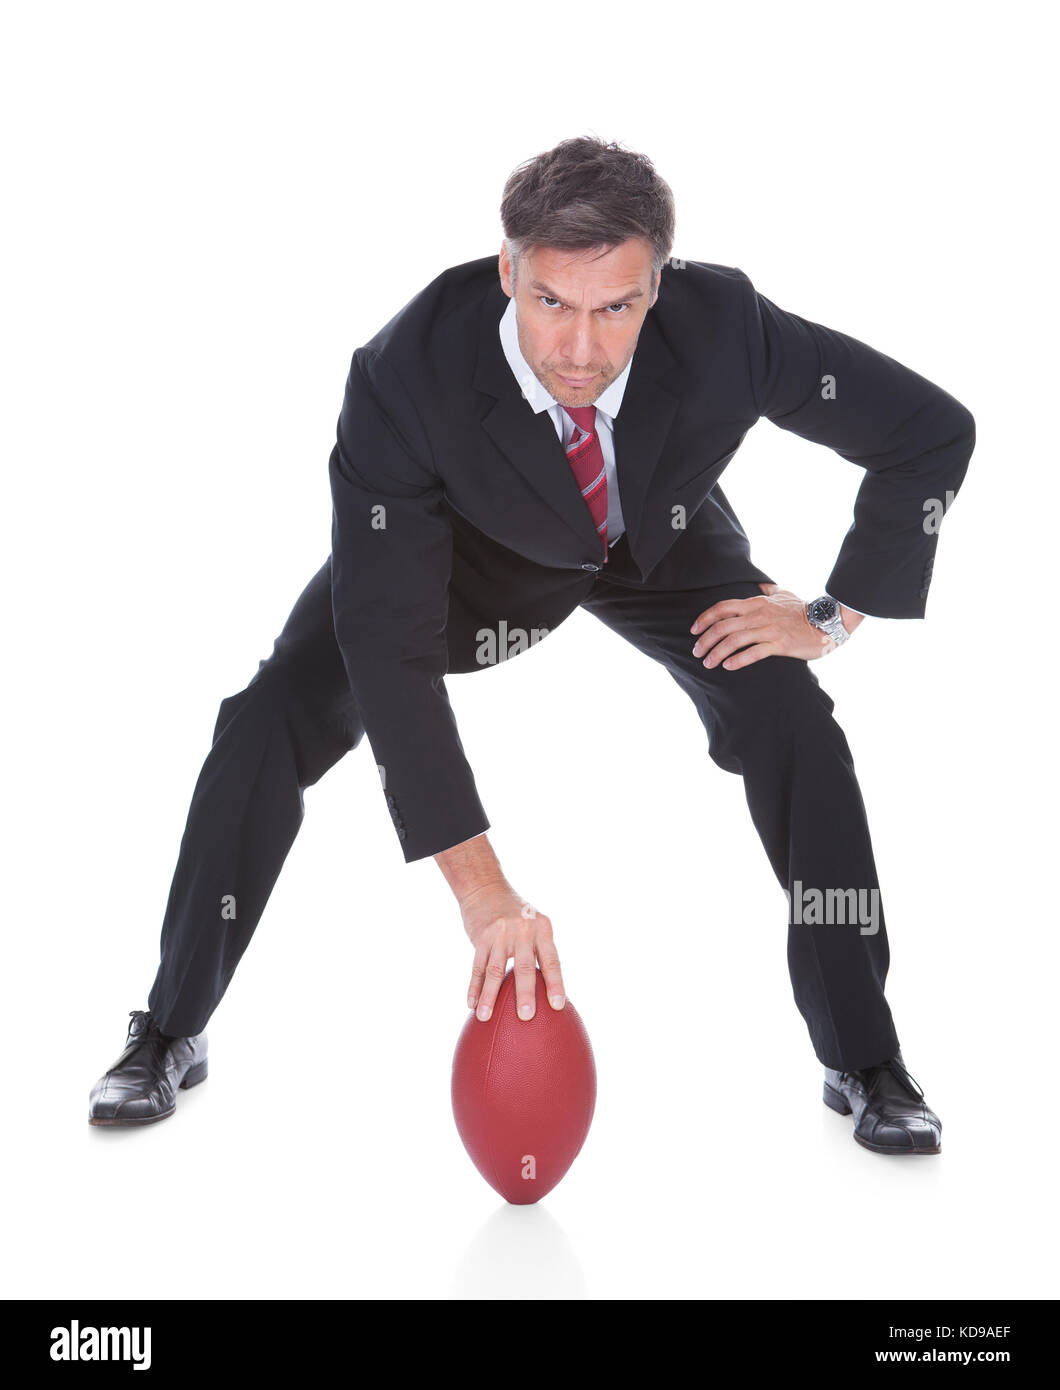 Portrait Of Mature Businessman Ready To Play American Football Stock Photo